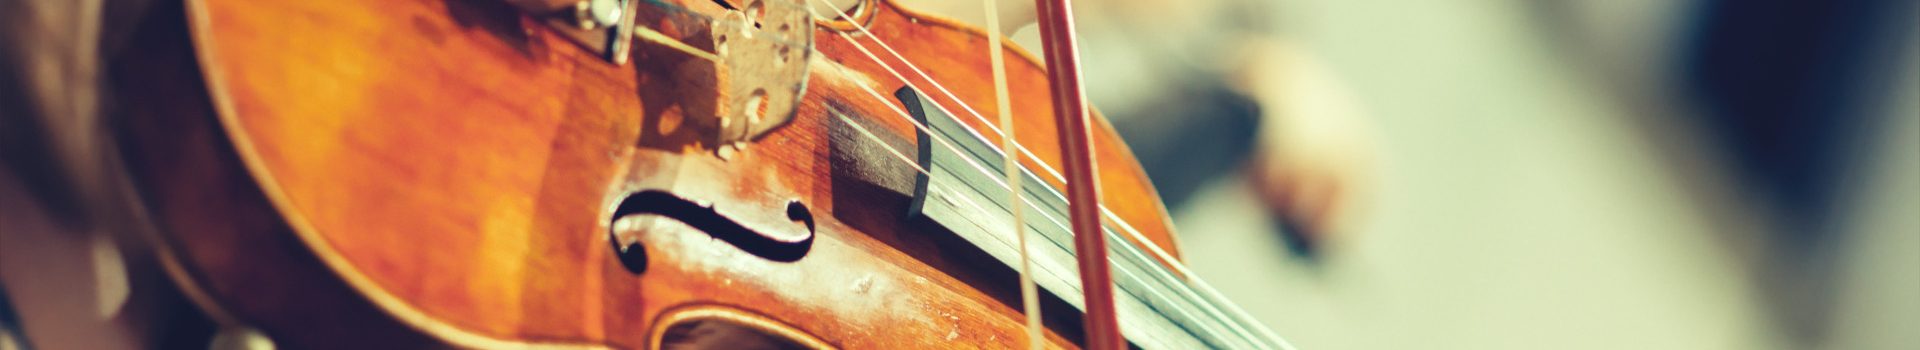 Close up of a violin being played on stage